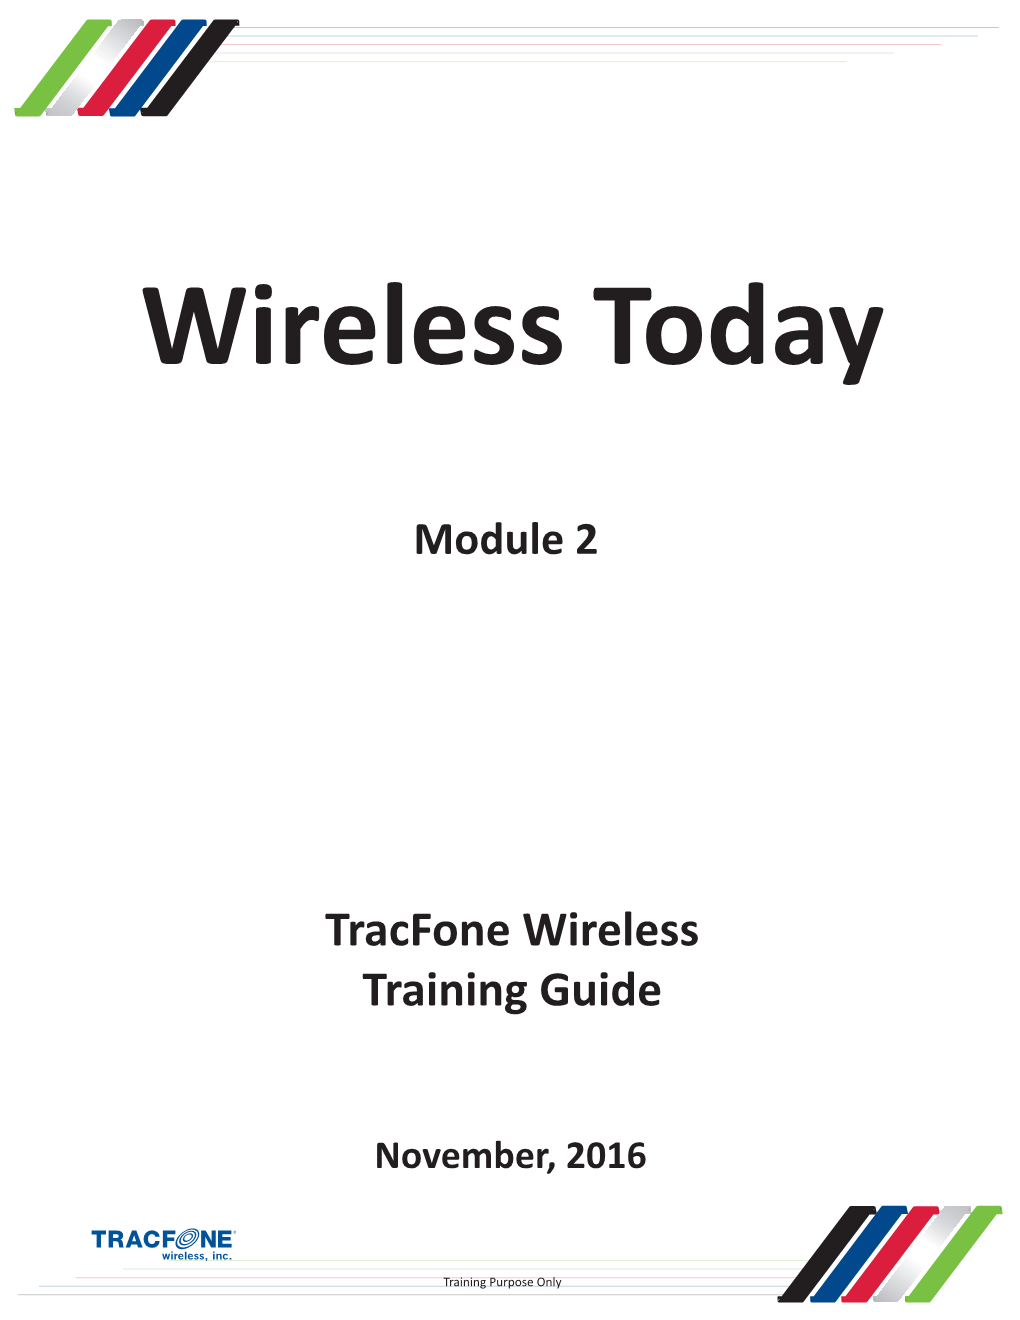 Tracfone Wireless Training Guide